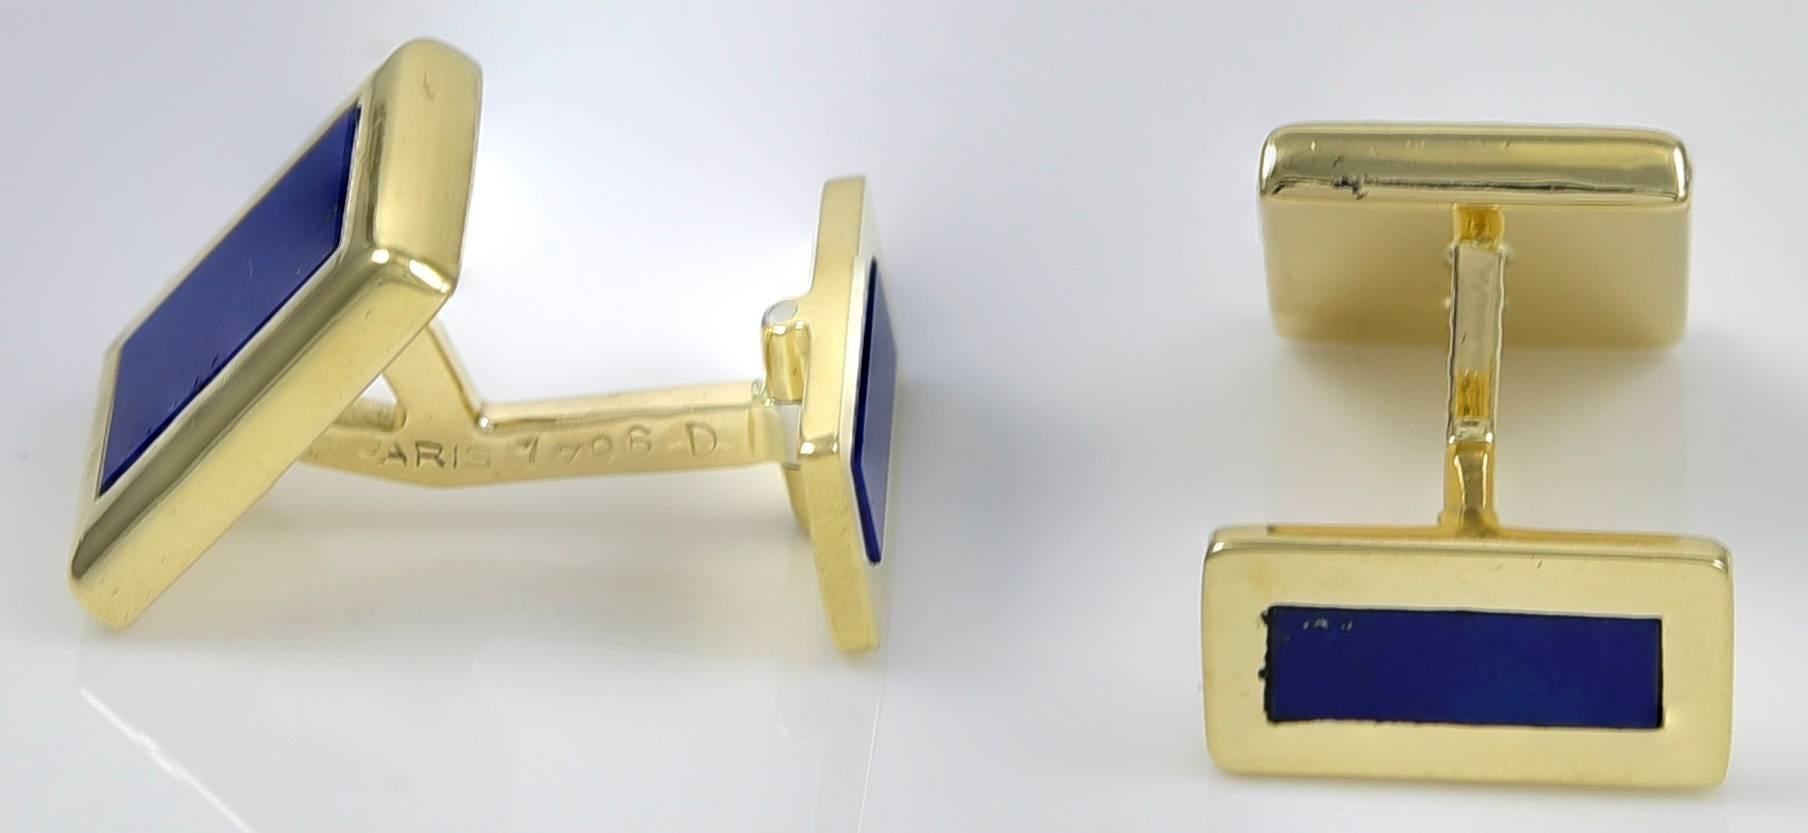 Very handsome cufflinks. Made, signed and numbered by Chaumet Paris. Heavy gauge 18K yellow gold, set with rich lapis on front and back. Back bar has flip mechanism for easy closure. A solid, classic distinguished cufflink.

Alice Kwartler has